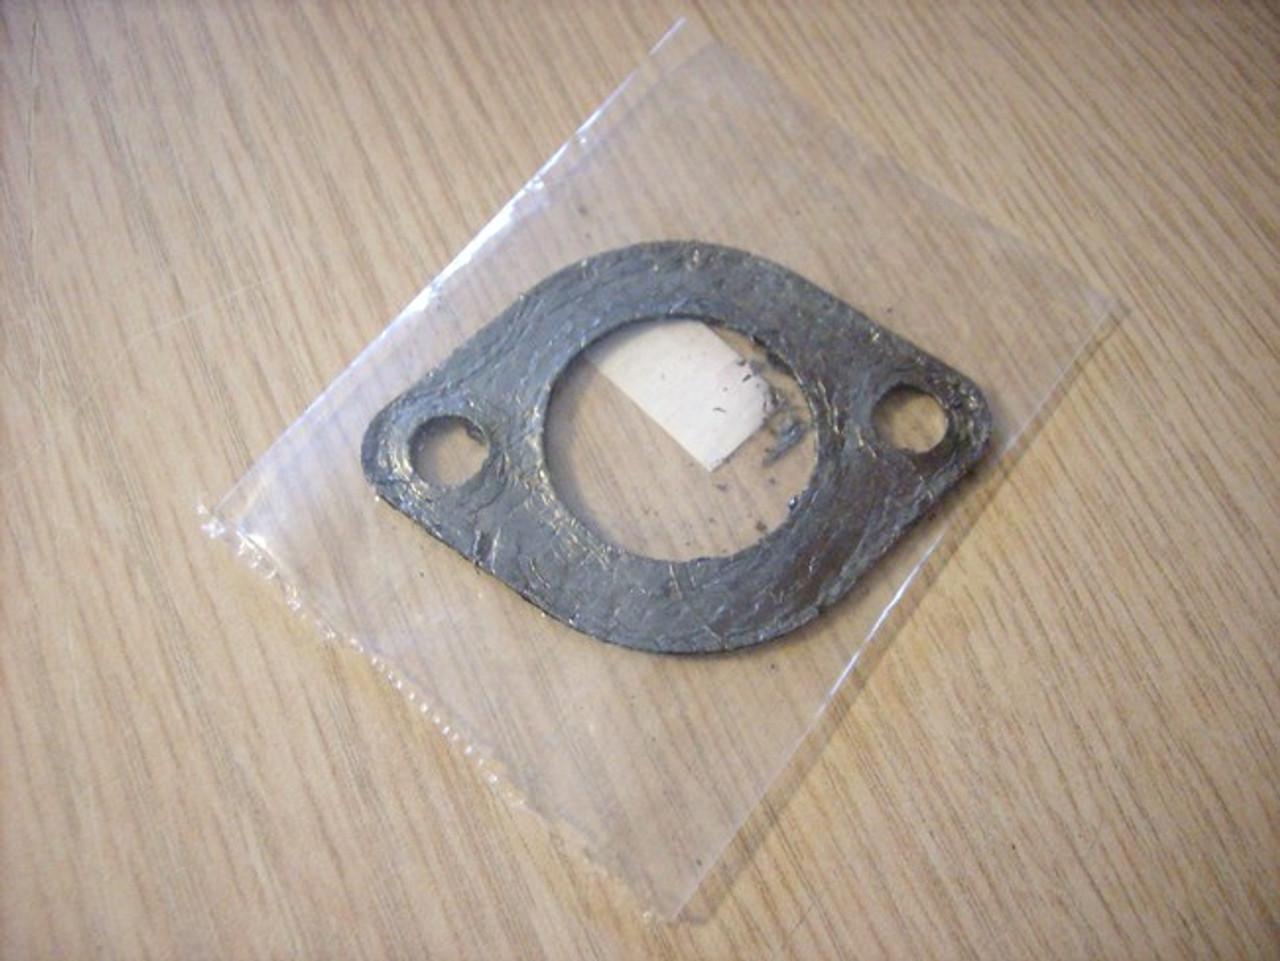 Muffler Exhaust Gasket for Briggs and Stratton 270918, 272309, 692237 for 5 HP and others